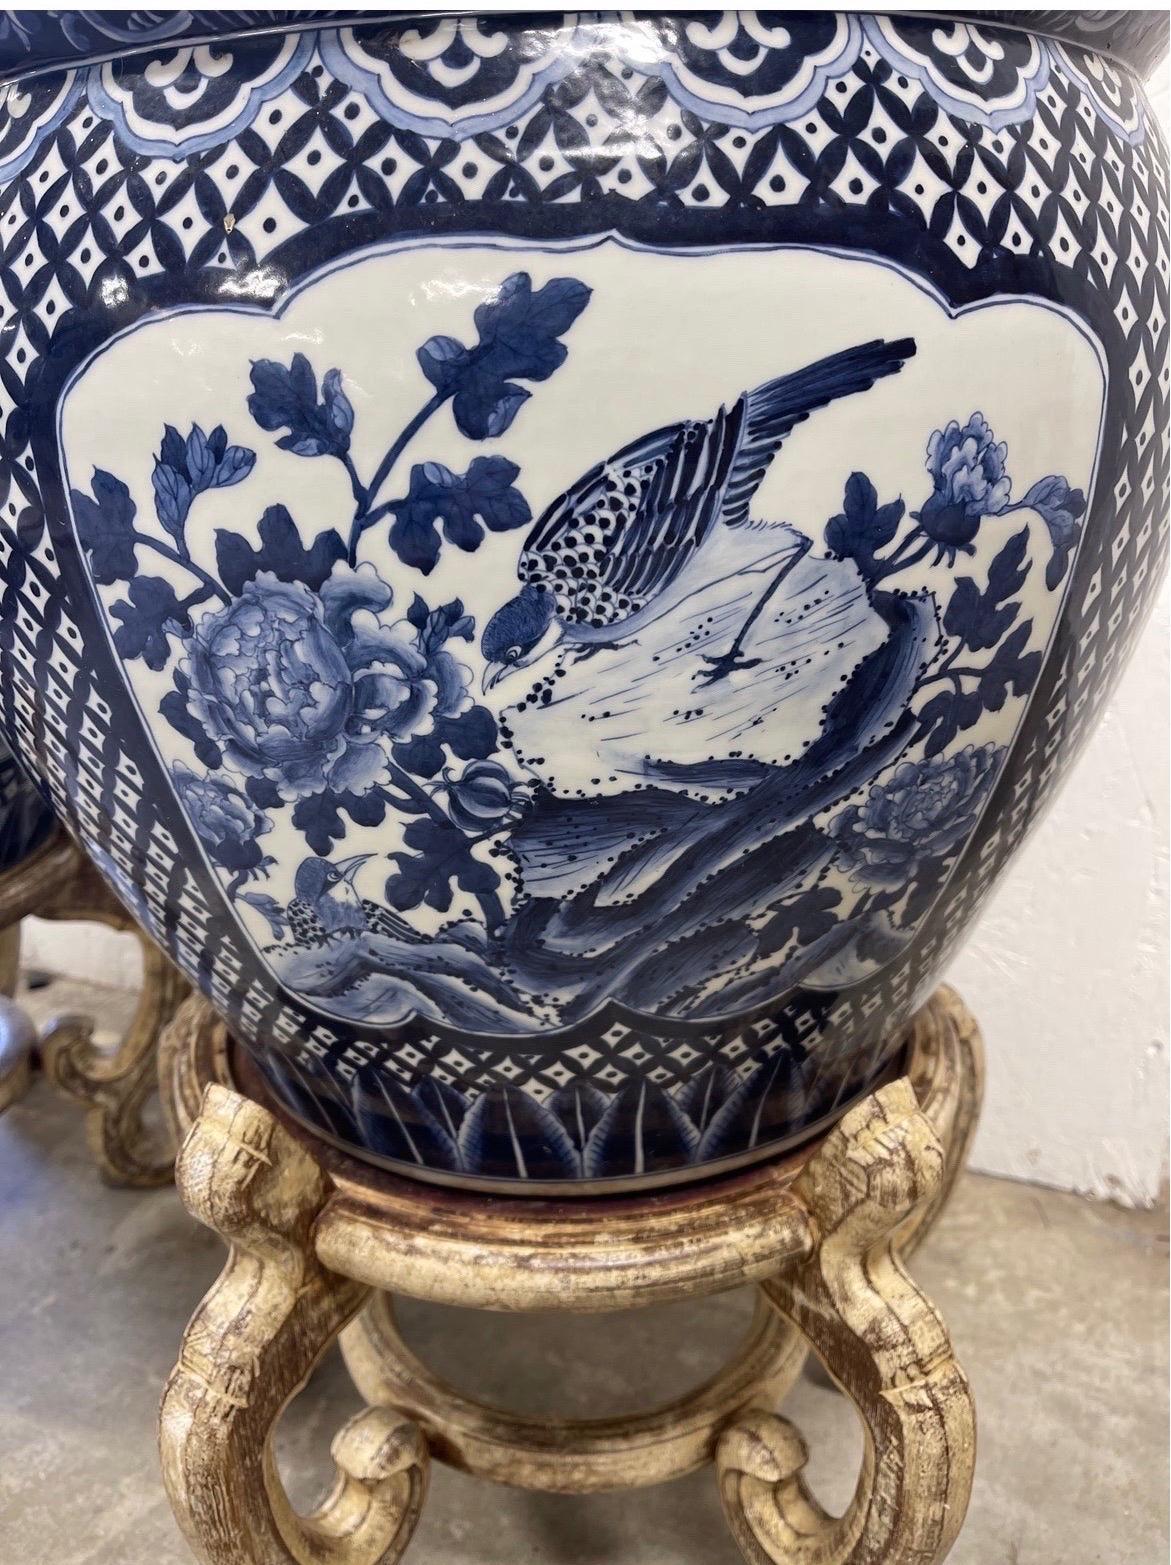 Pair of quality chinese export style blue and white jardineres on distressed wood stands. Decorated with foliate and bird windows to each.
Measures: Planters 13” H x 16” W
Stands 10” H x 11” W.